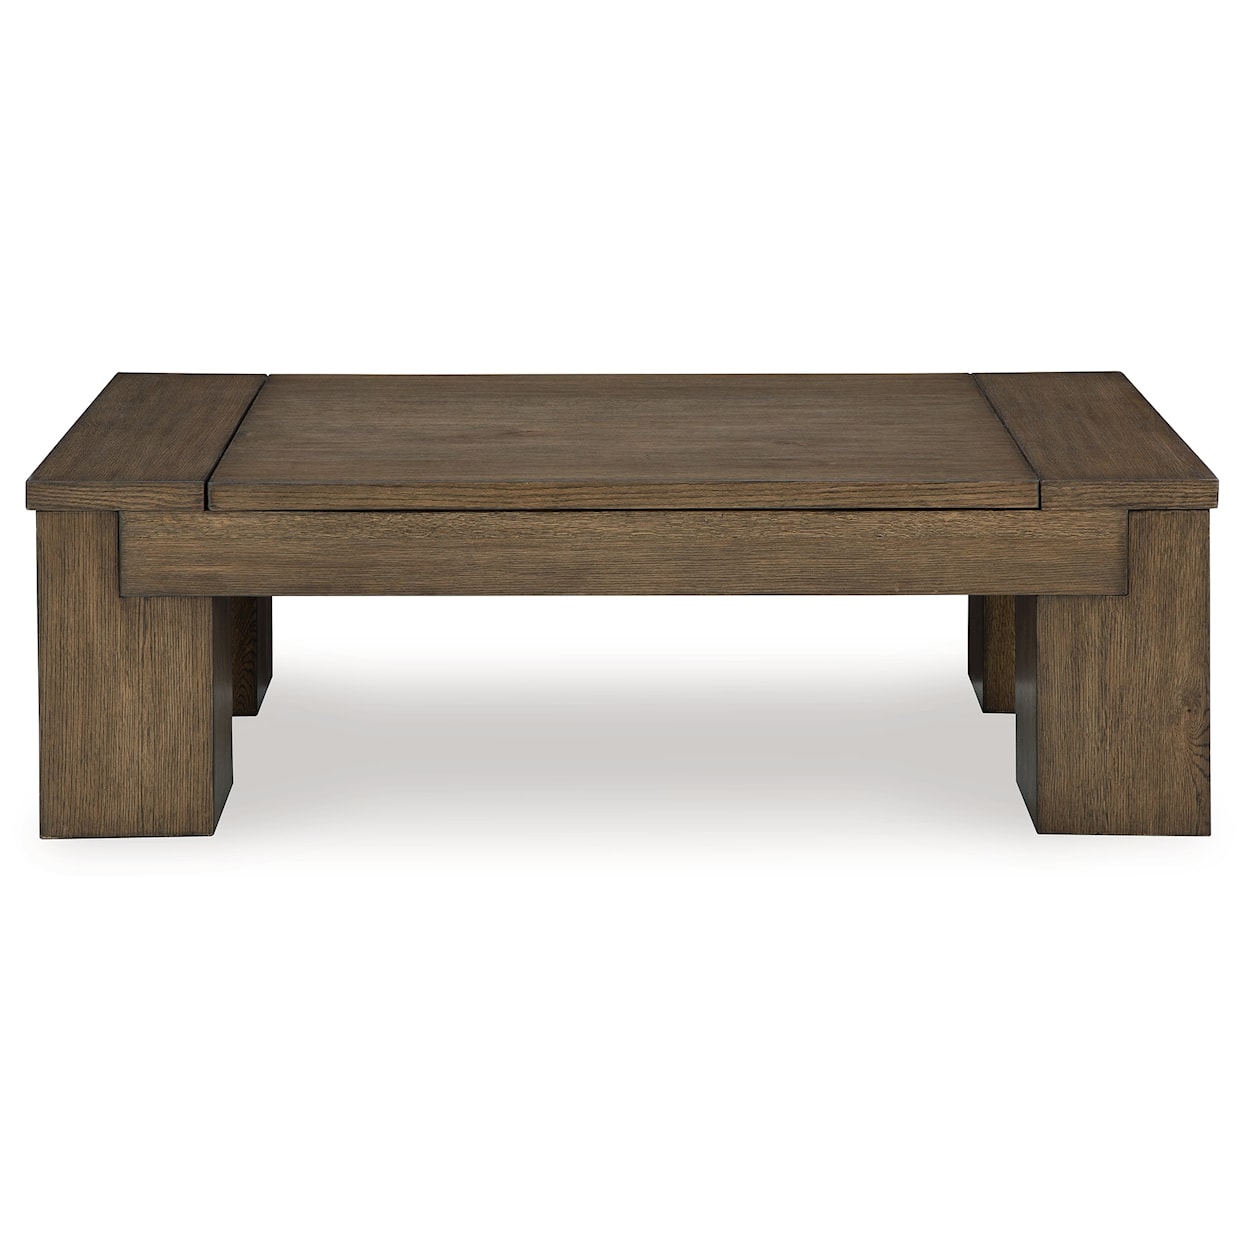 Benchcraft Rosswain Lift-Top Coffee Table